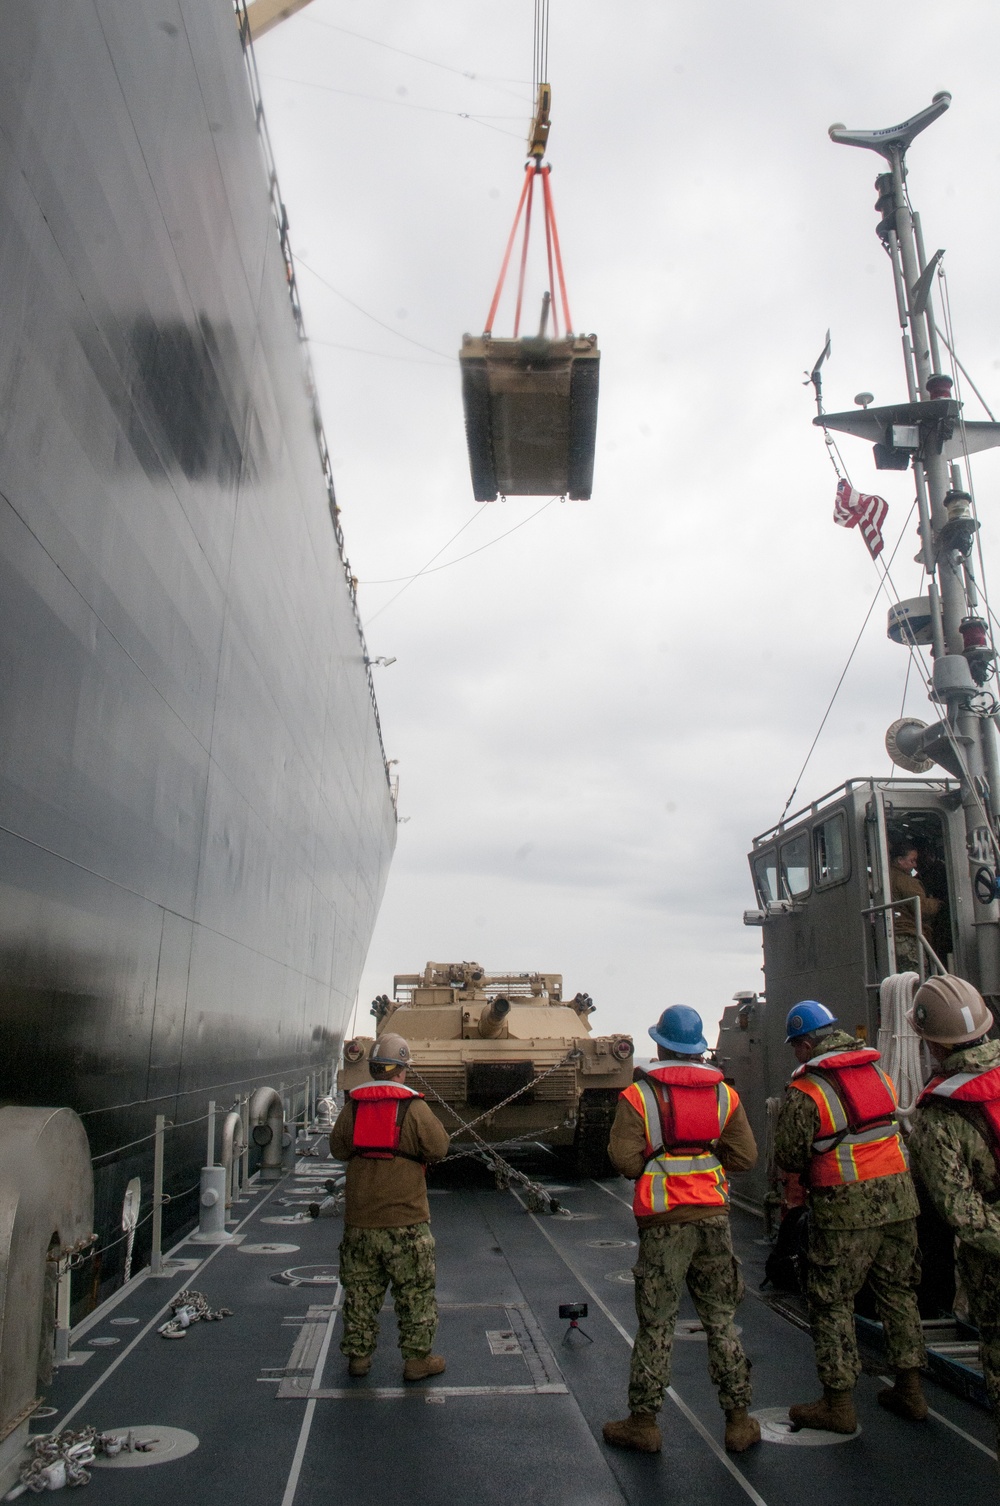 Elements of  NAVAL BEACH GROUP TWO Kick Off Saber Strike 17 With In-stream Maritime Offloads